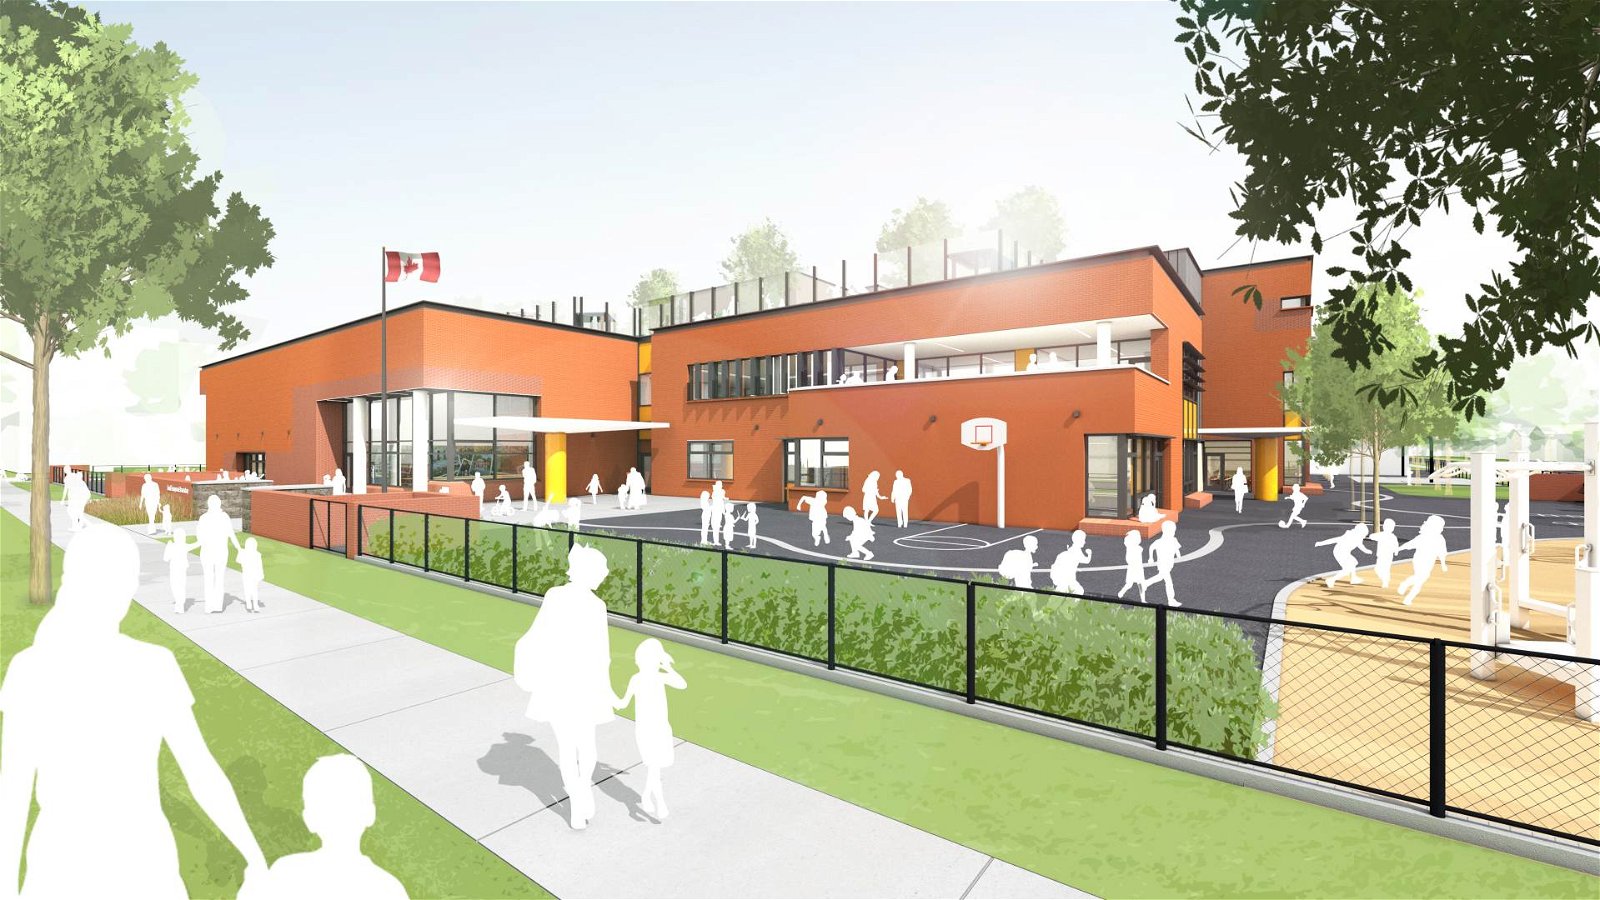 Lord Tennyson Elementary School Replacement